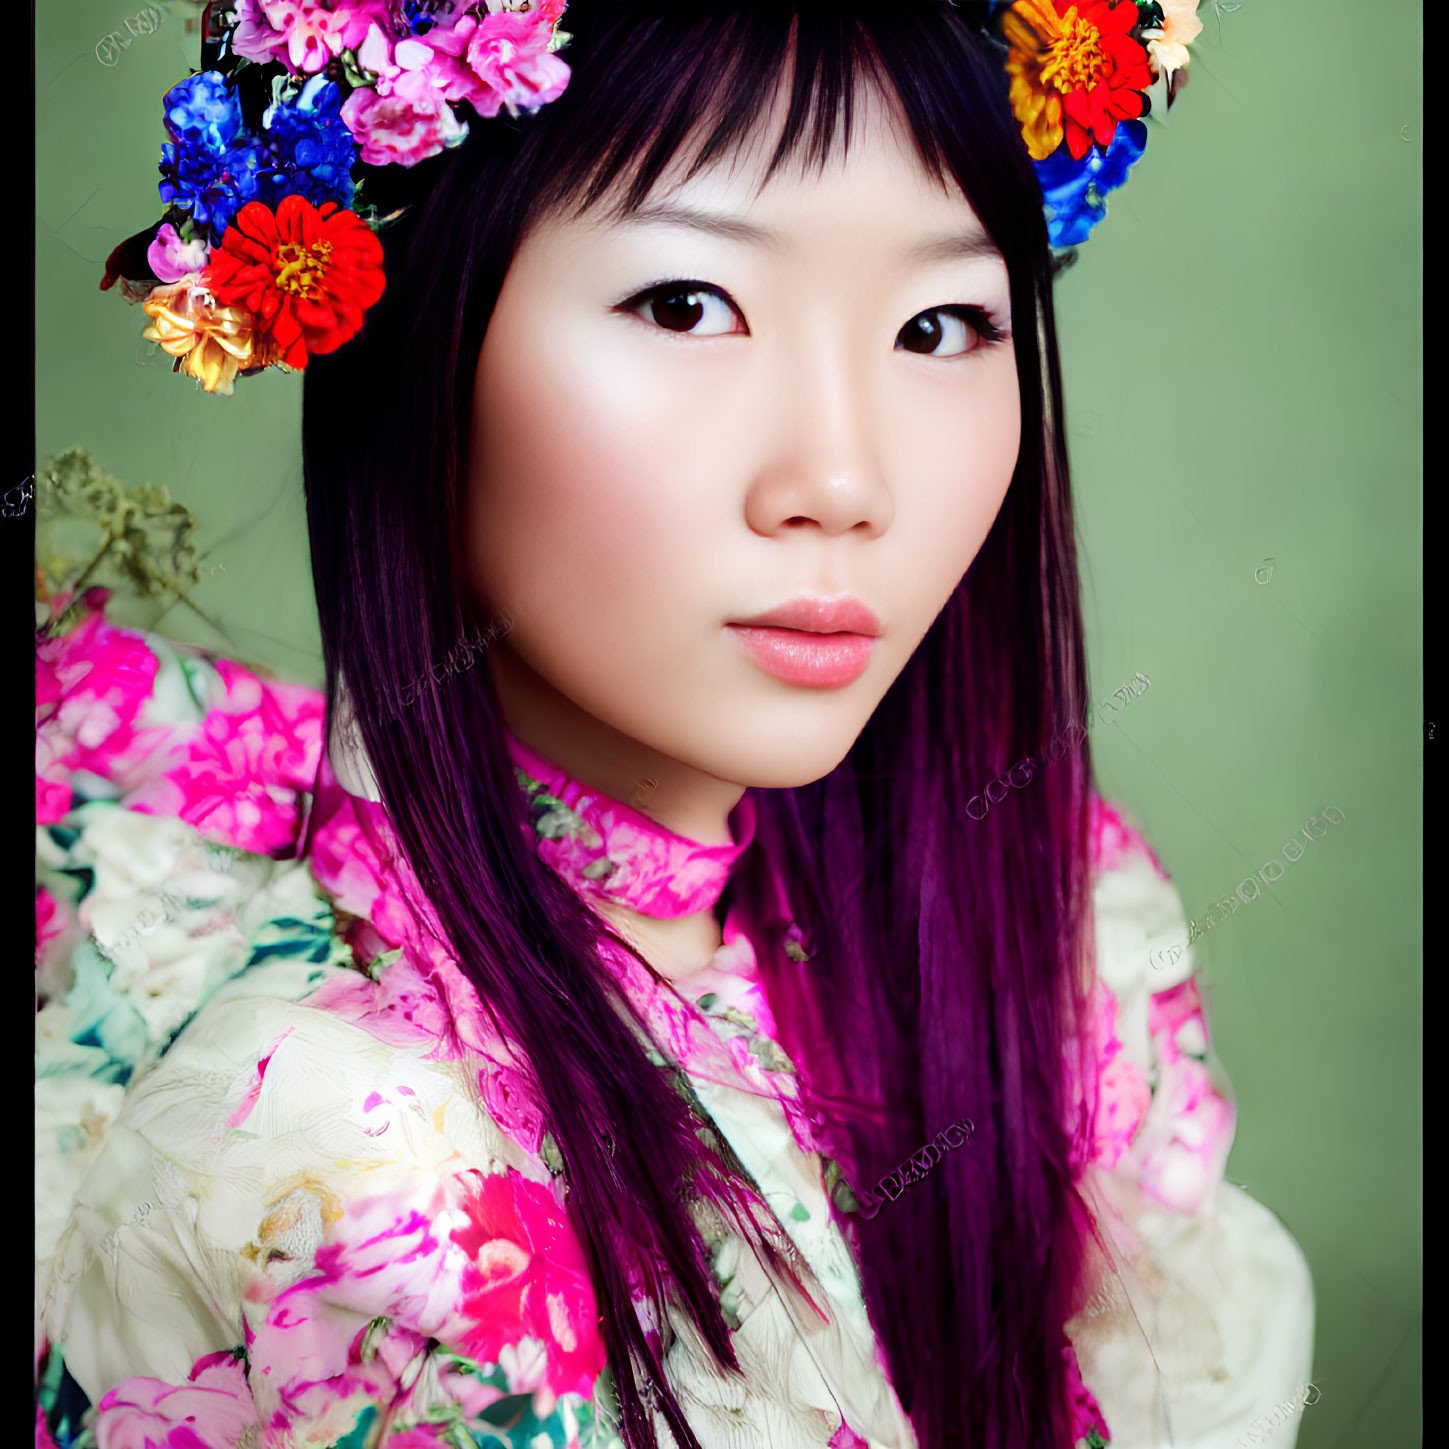 Woman with Purple Hair and Floral Headpiece in Colorful Blouse on Green Background